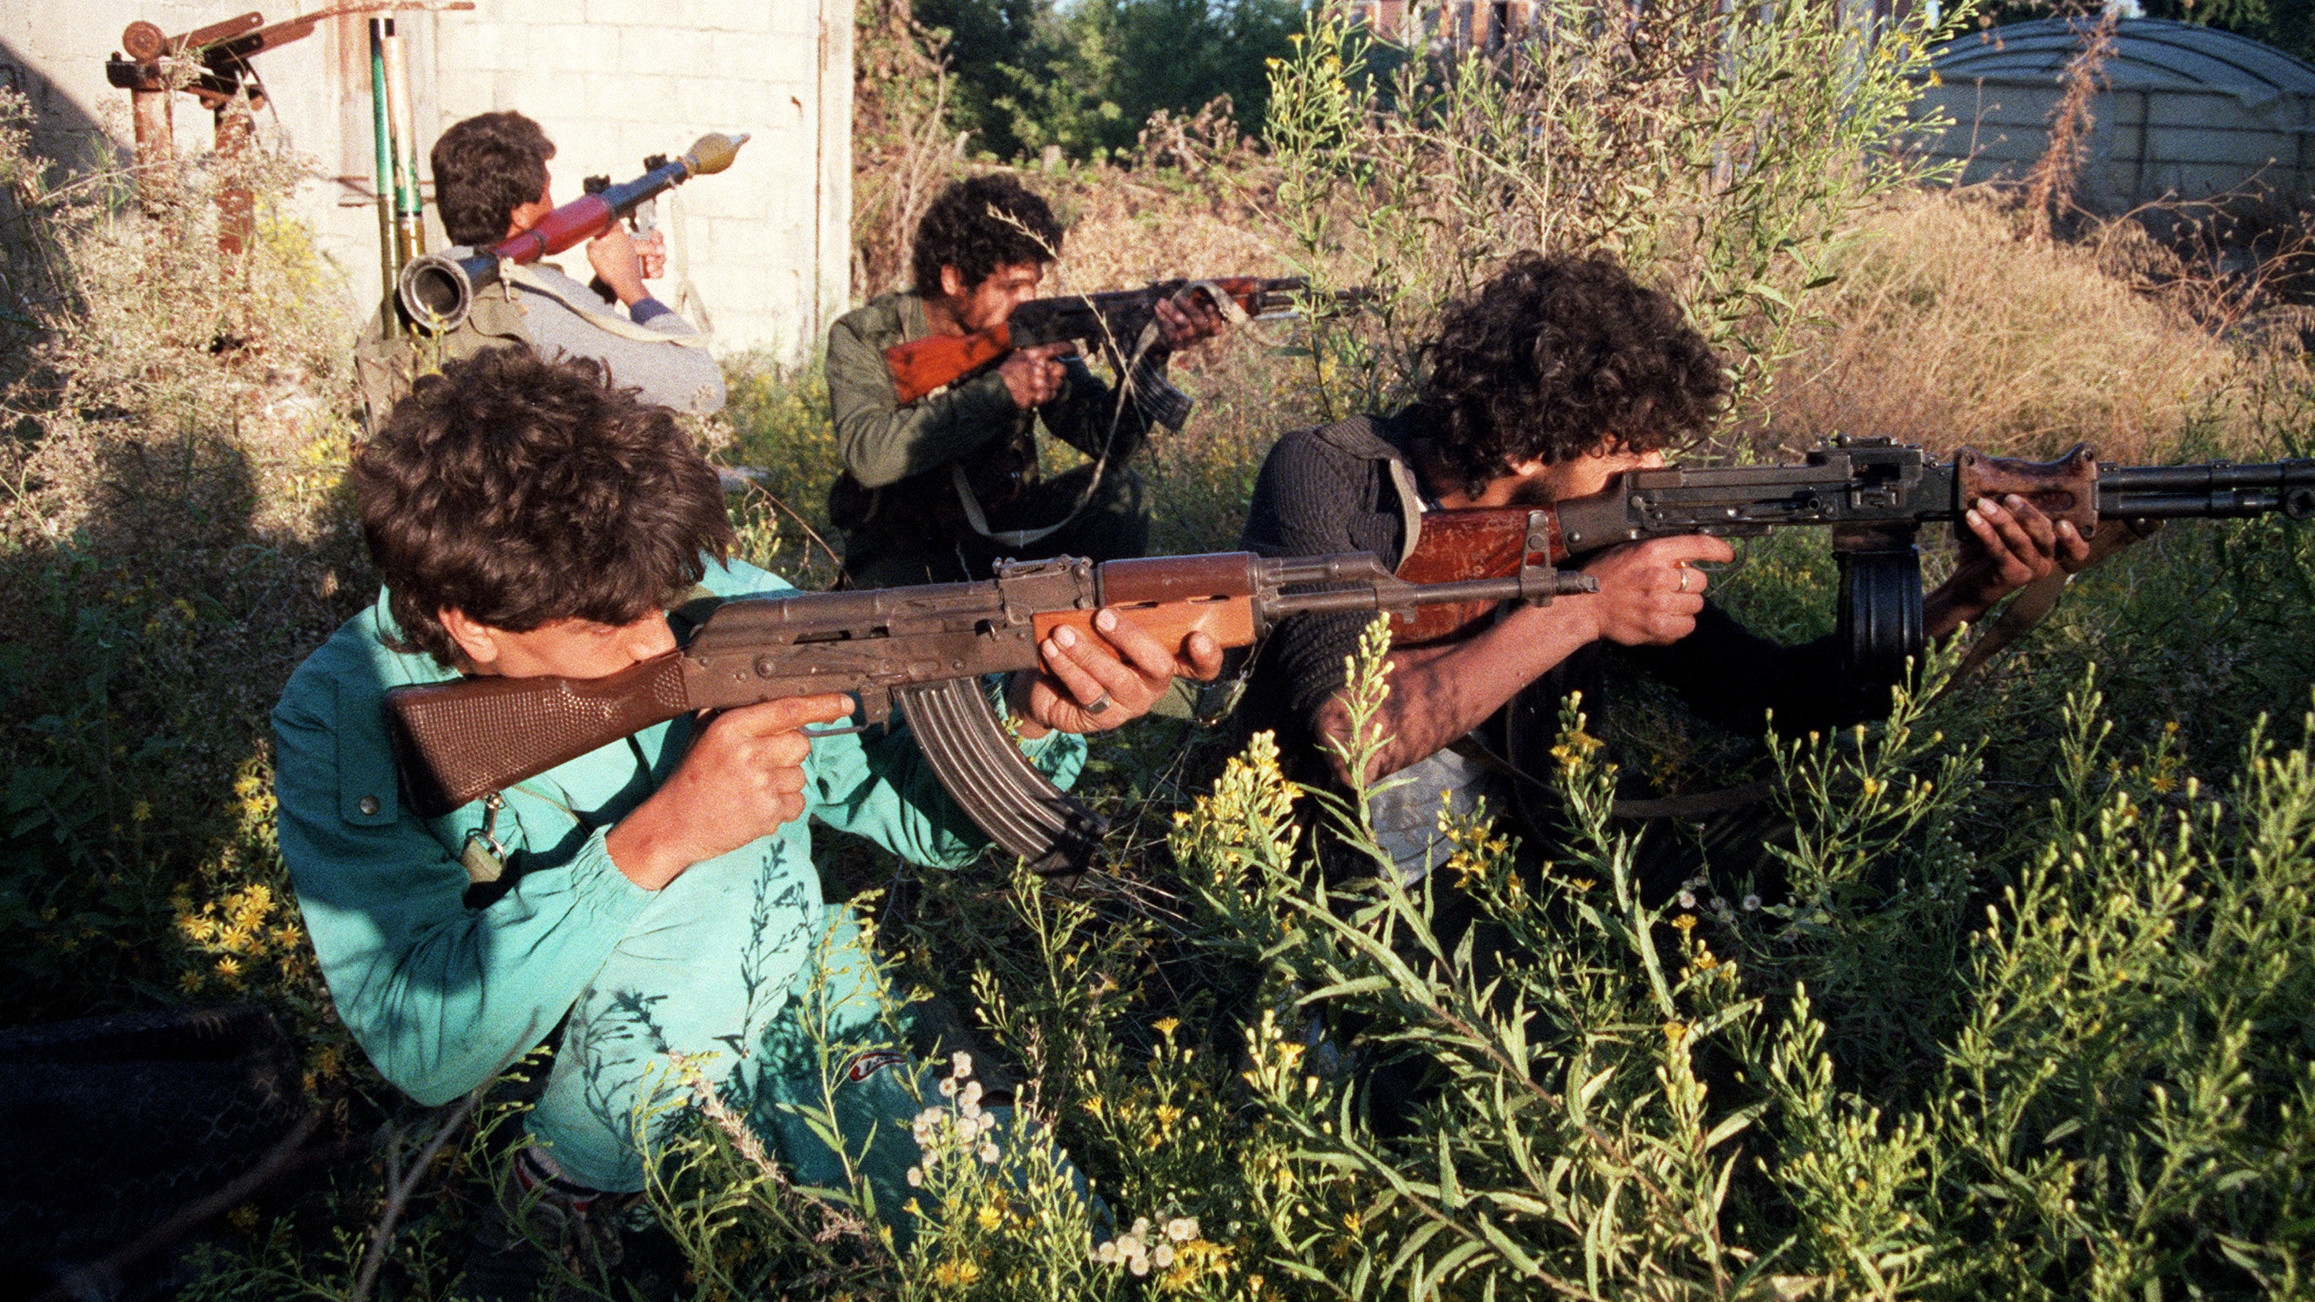 Palestinian pro-Arafat fighters survey the area of the Saida refugee camp, 25 October 1986 (Hilal Habli/AFP)